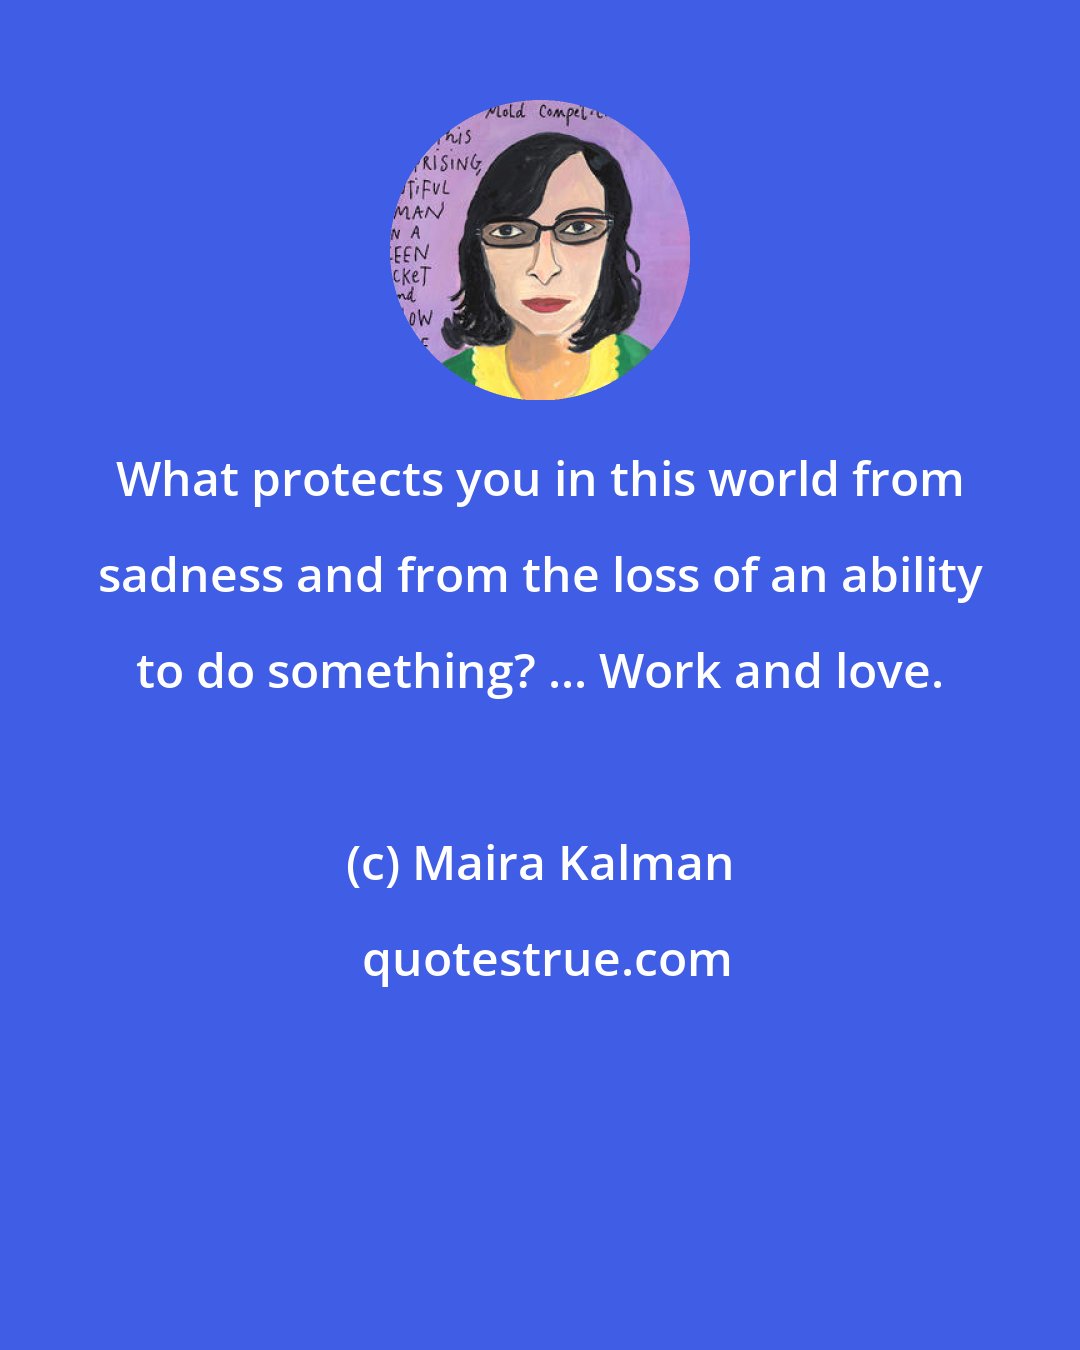 Maira Kalman: What protects you in this world from sadness and from the loss of an ability to do something? ... Work and love.